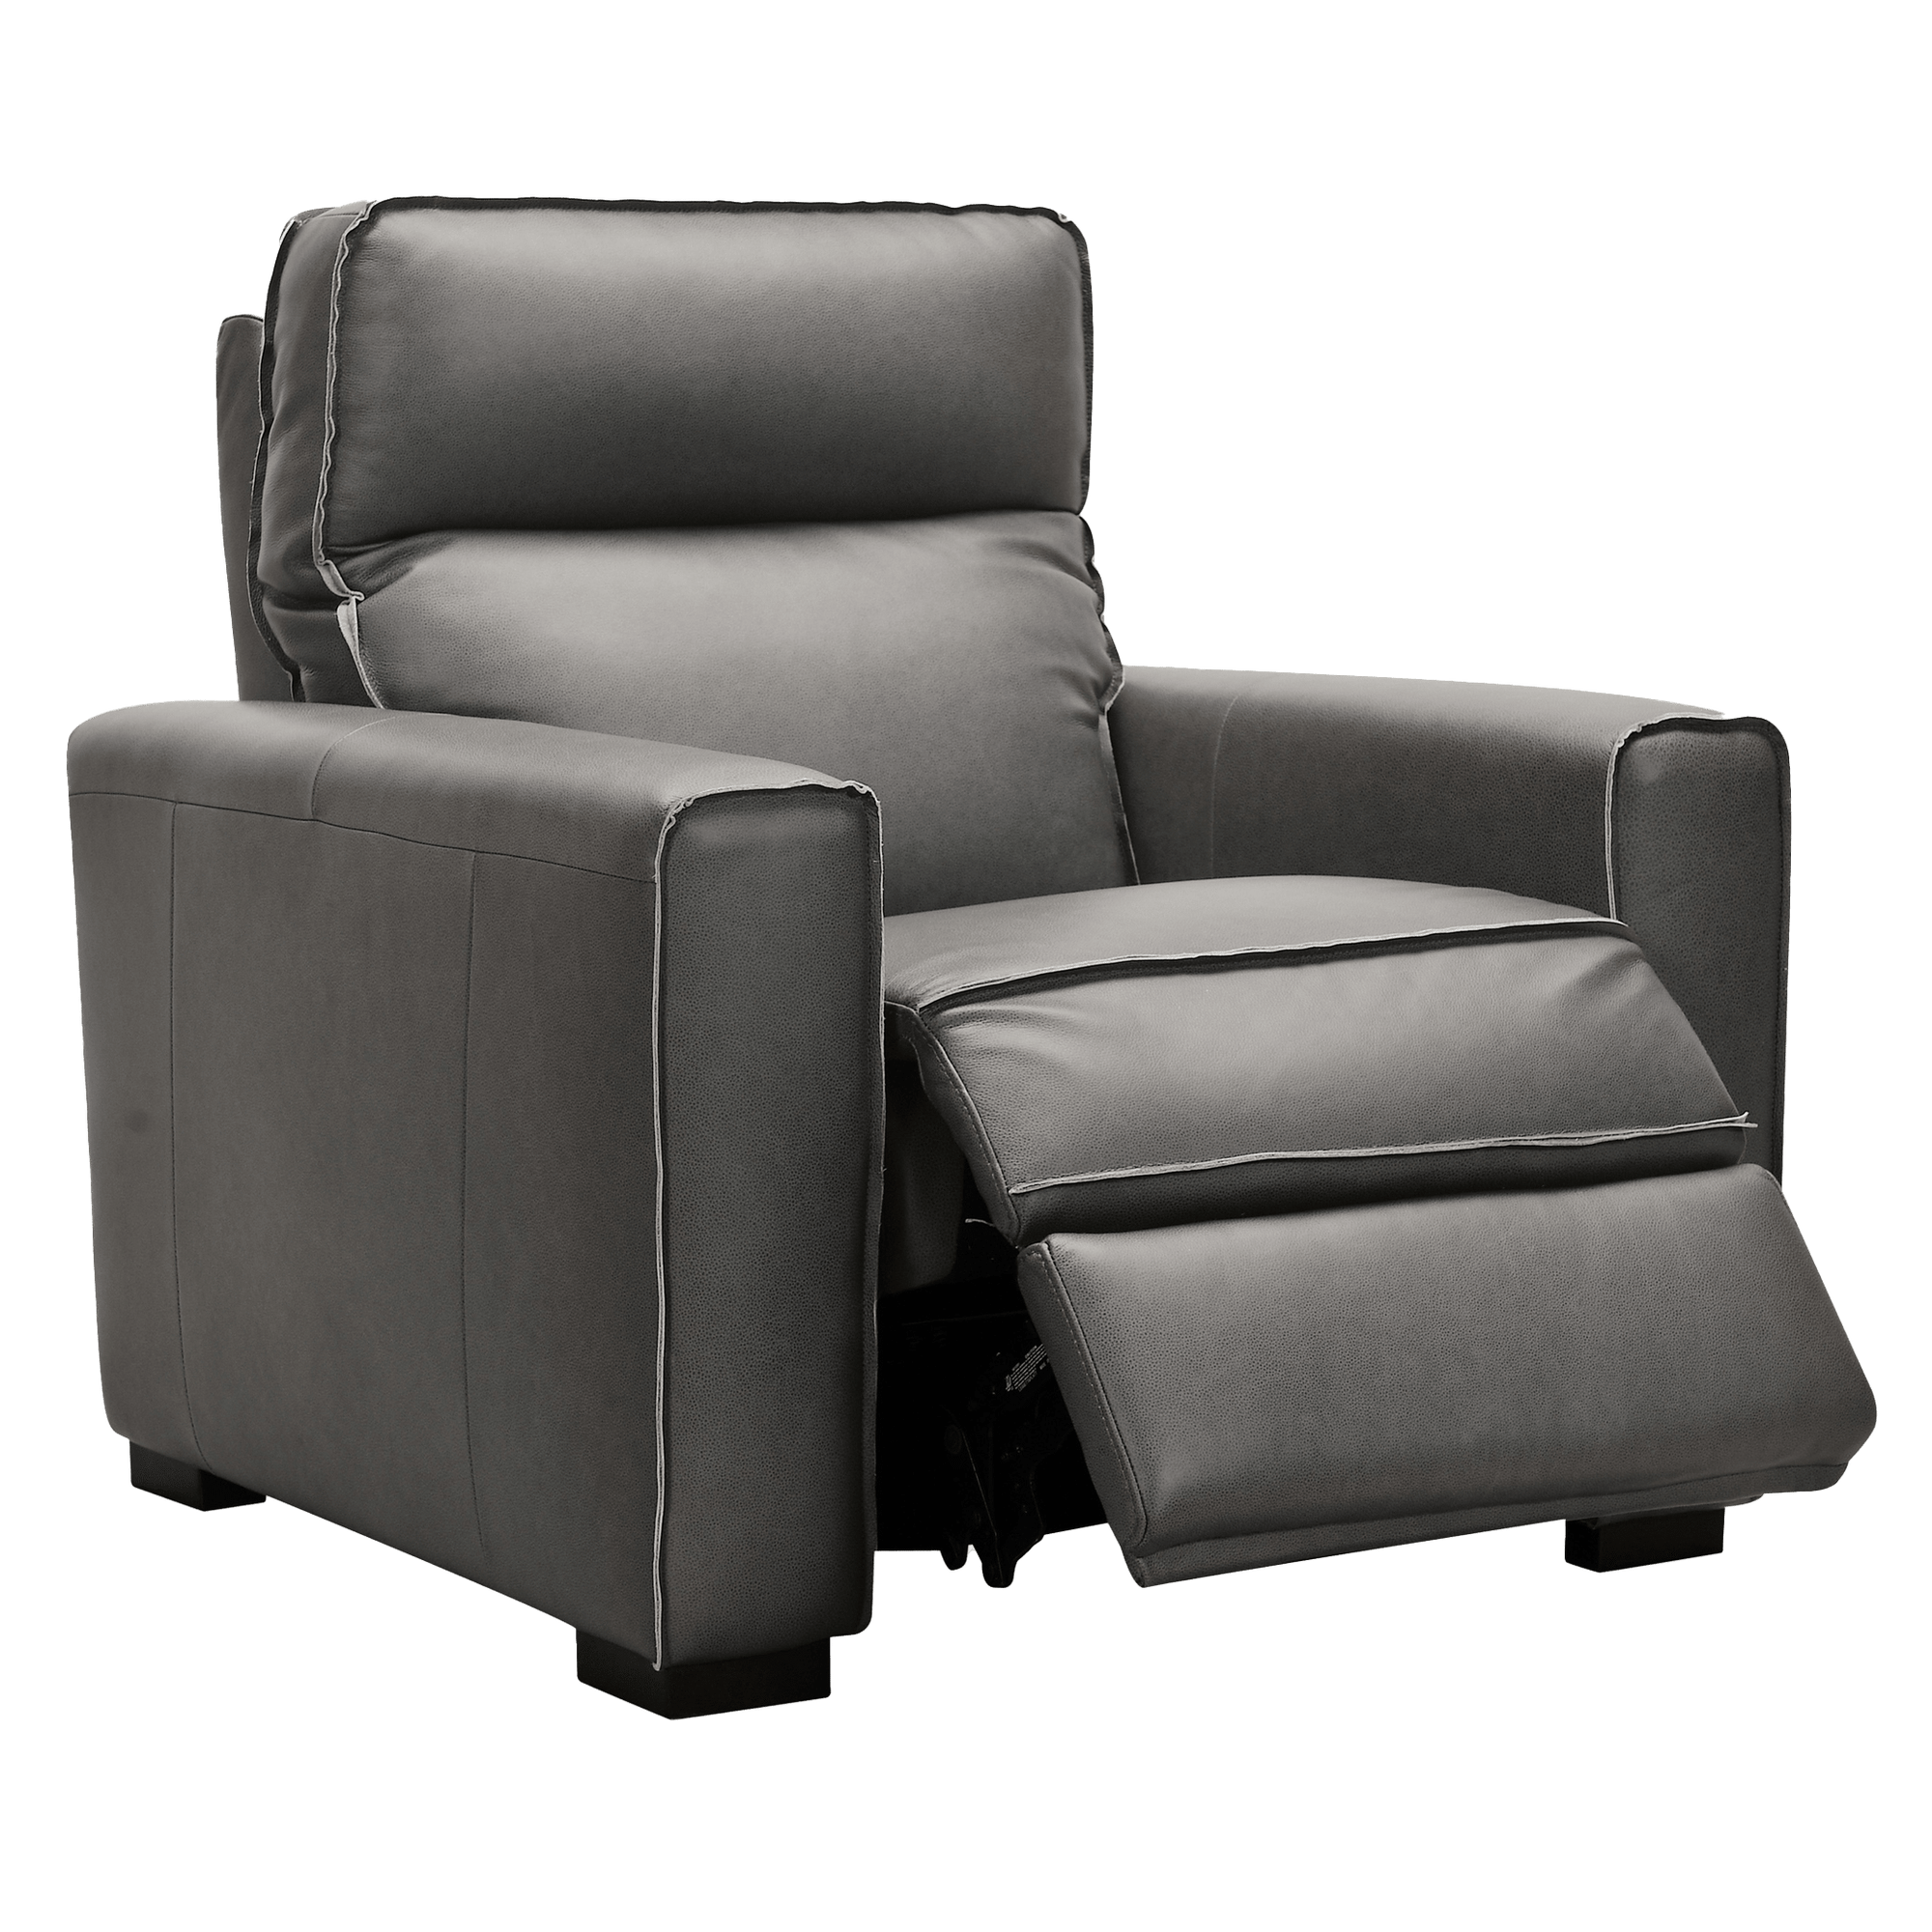 Baxlee Leather Power Recliner with Articulating Headrest, Leather